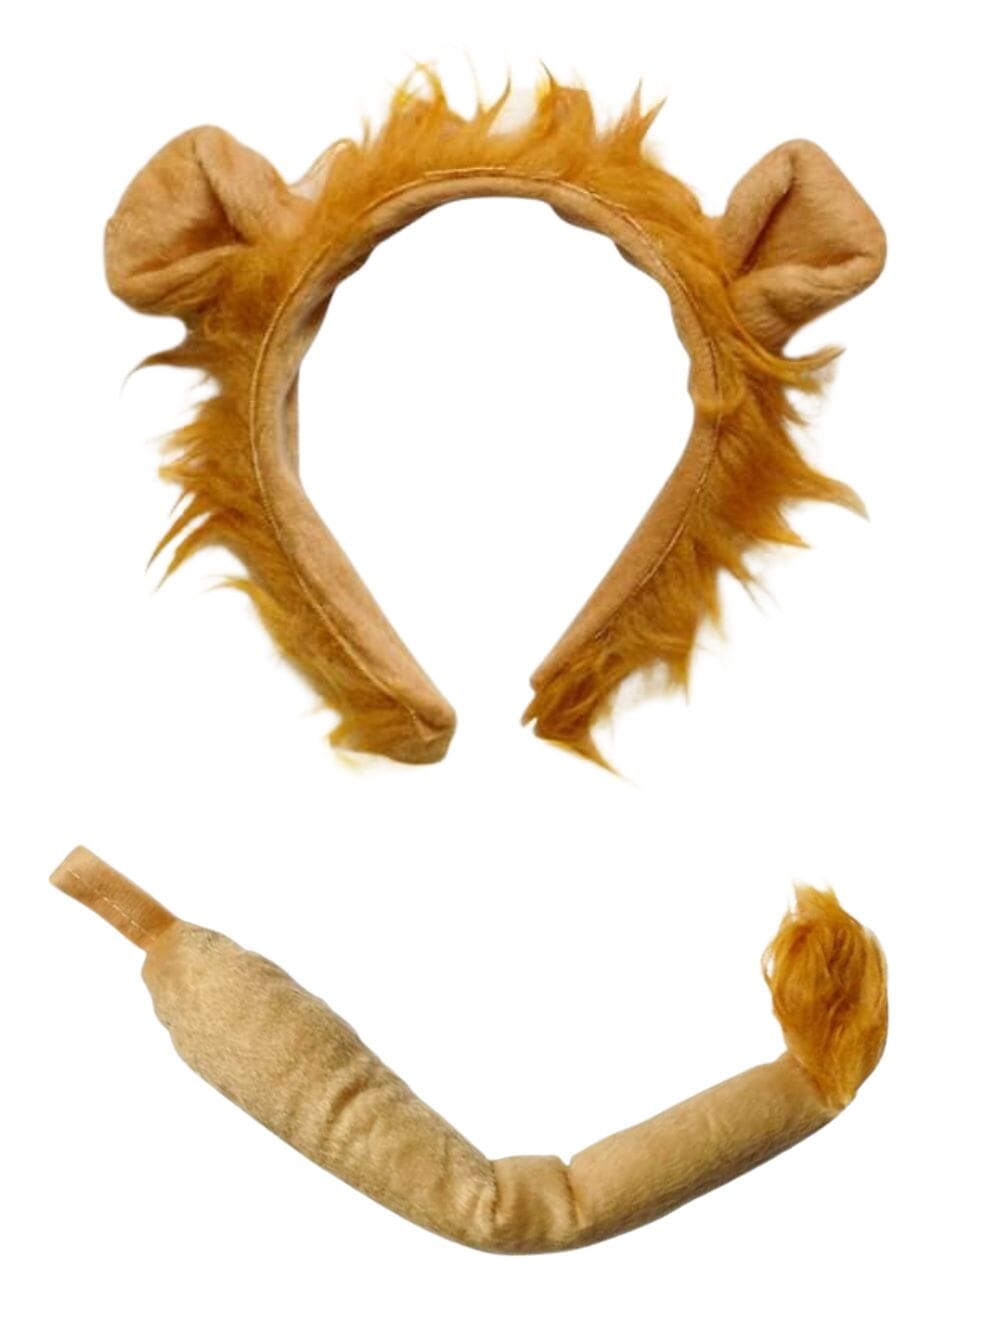 Lion Headband Ears & Tail, Kid or Adult Size Costume Accessories - Sydney So Sweet